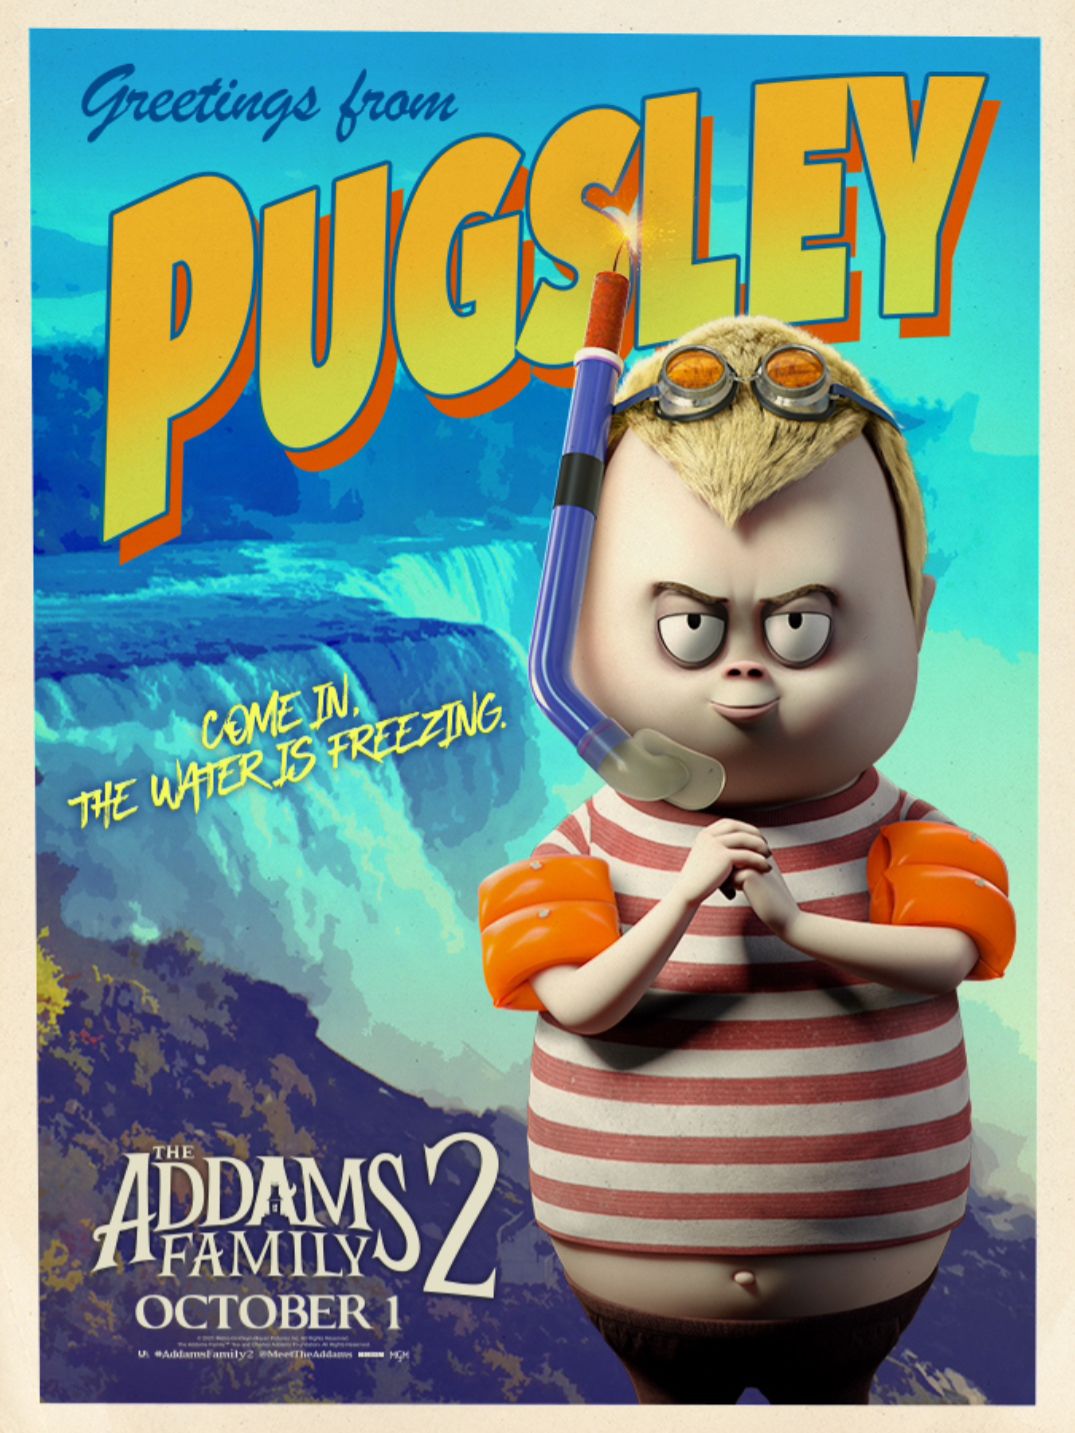 The Addams Family 2 Pugsley Character Poster